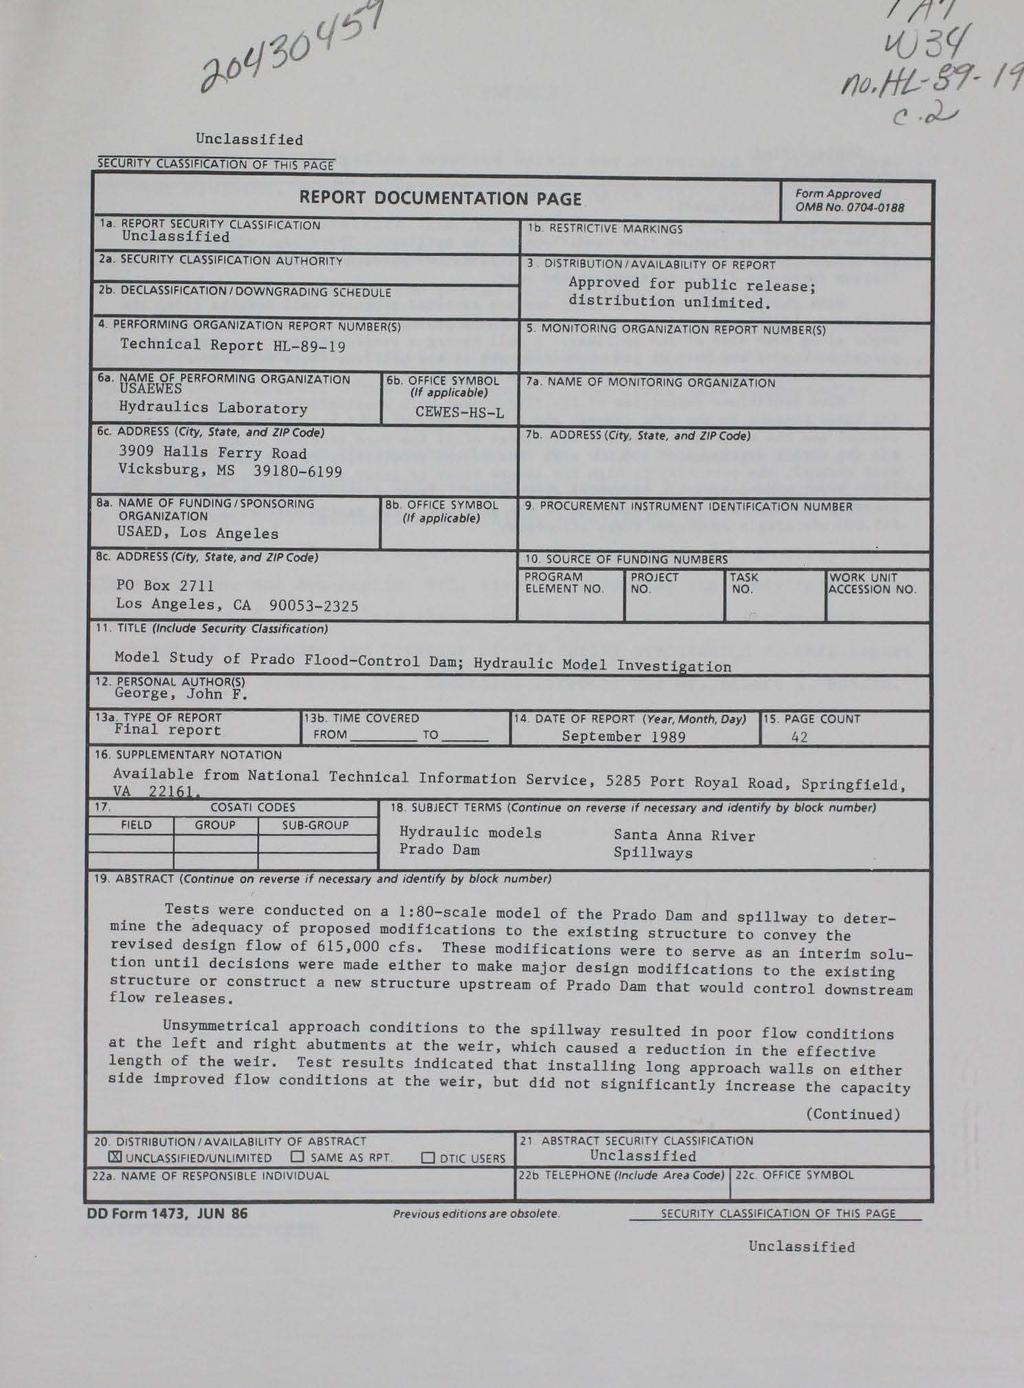 Unclassified SECURITY CLASSIFICATION OF THIS PAGE 1 a. REPORT SECURITY CLASSIFICATION Unclassified REPORT DOCUMENTATION PAGE 1 b RESTRICTIVE MARKINGS Form Approved OMB No. 0704 0188 2a.